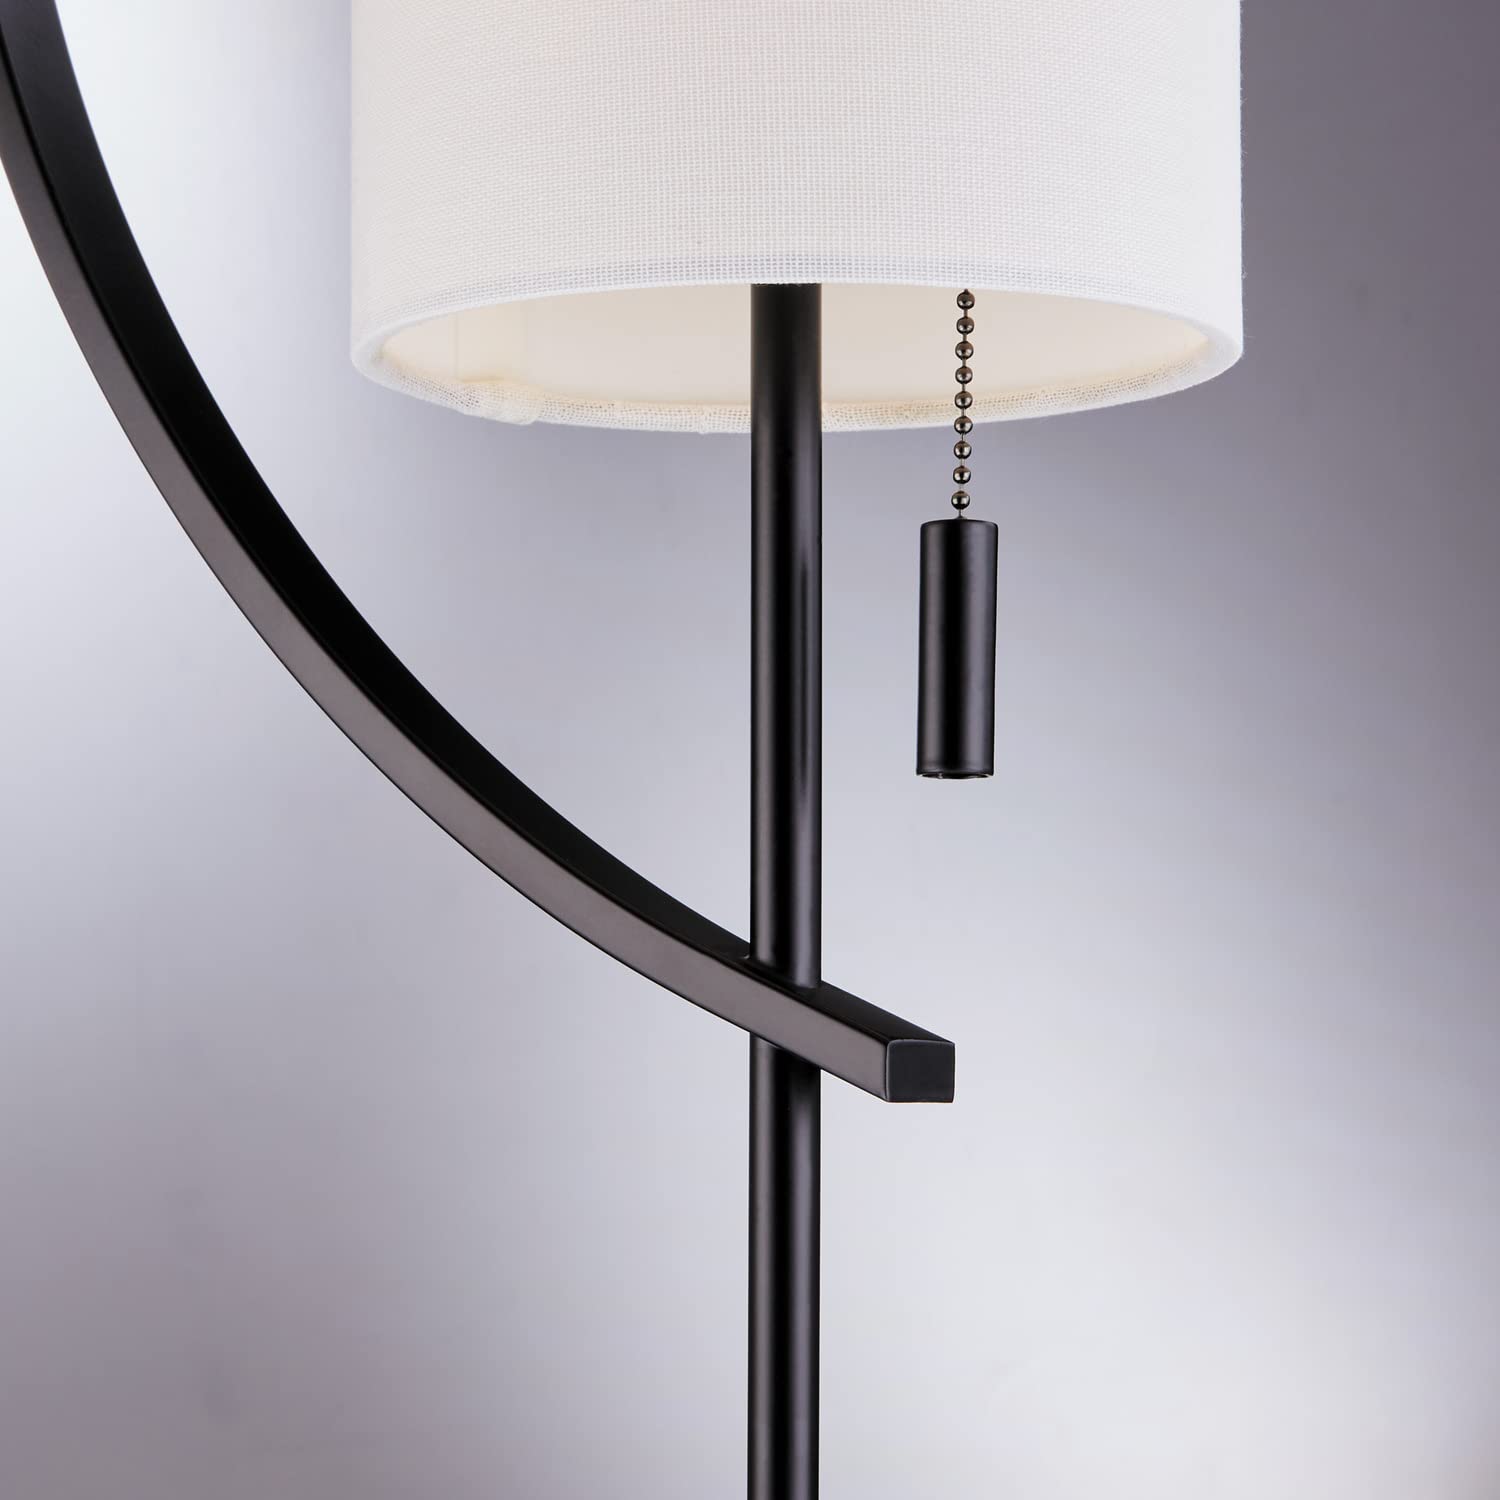 Lite Source Floor LAMP, Black/Off-White Fabric Shade, E27 Type A 60W LS-83505BLK/WHT